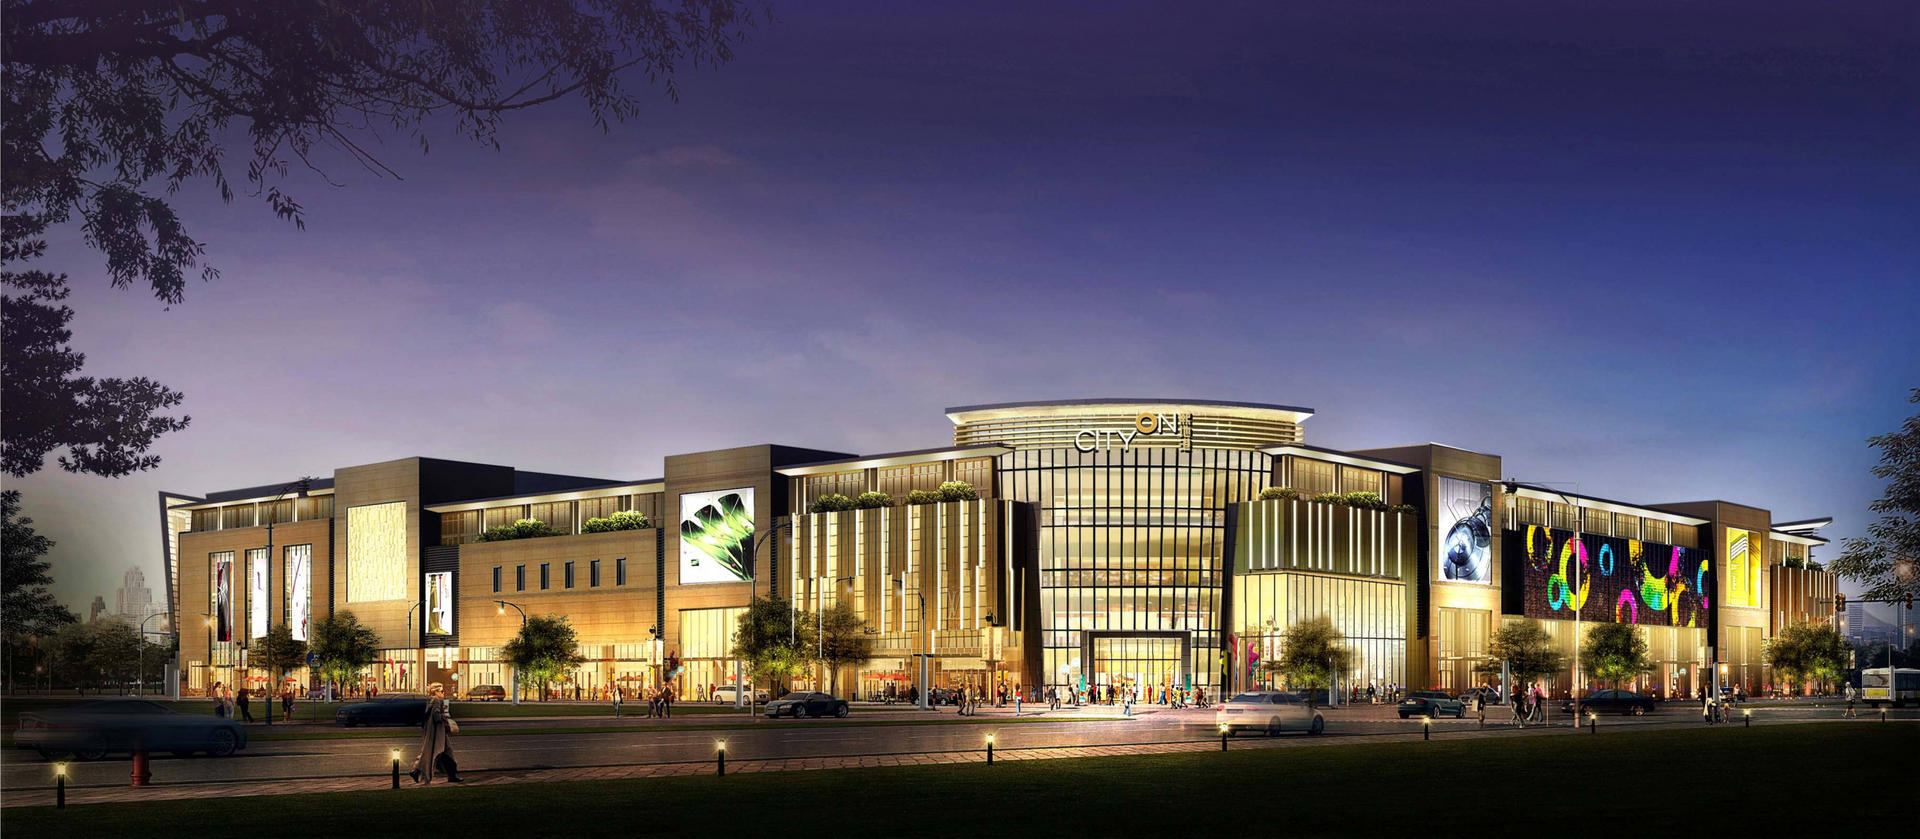 CityOn.Zhengzhou mall, located in the heart of Zhengdong New District, is scheduled to open later this year with a mix of shopping, restaurants, a supermarket and entertainment options.